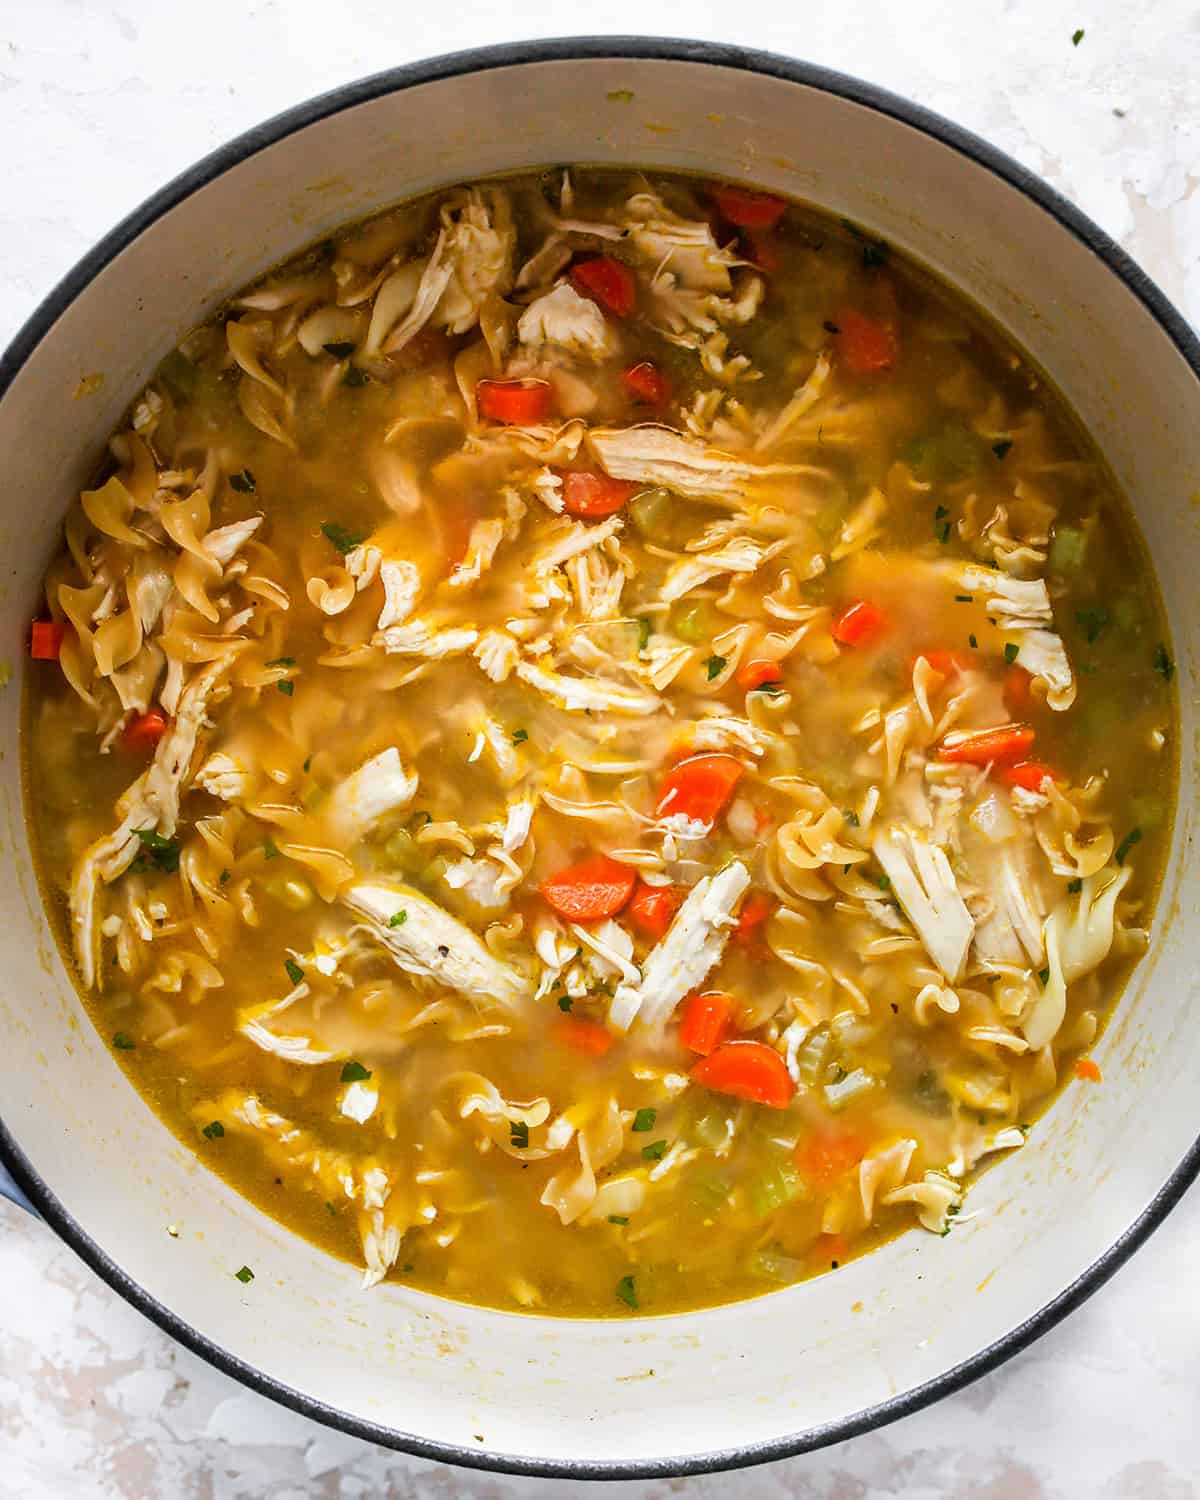 How to Make Chicken Noodle Soup - adding noodles before they are cooked